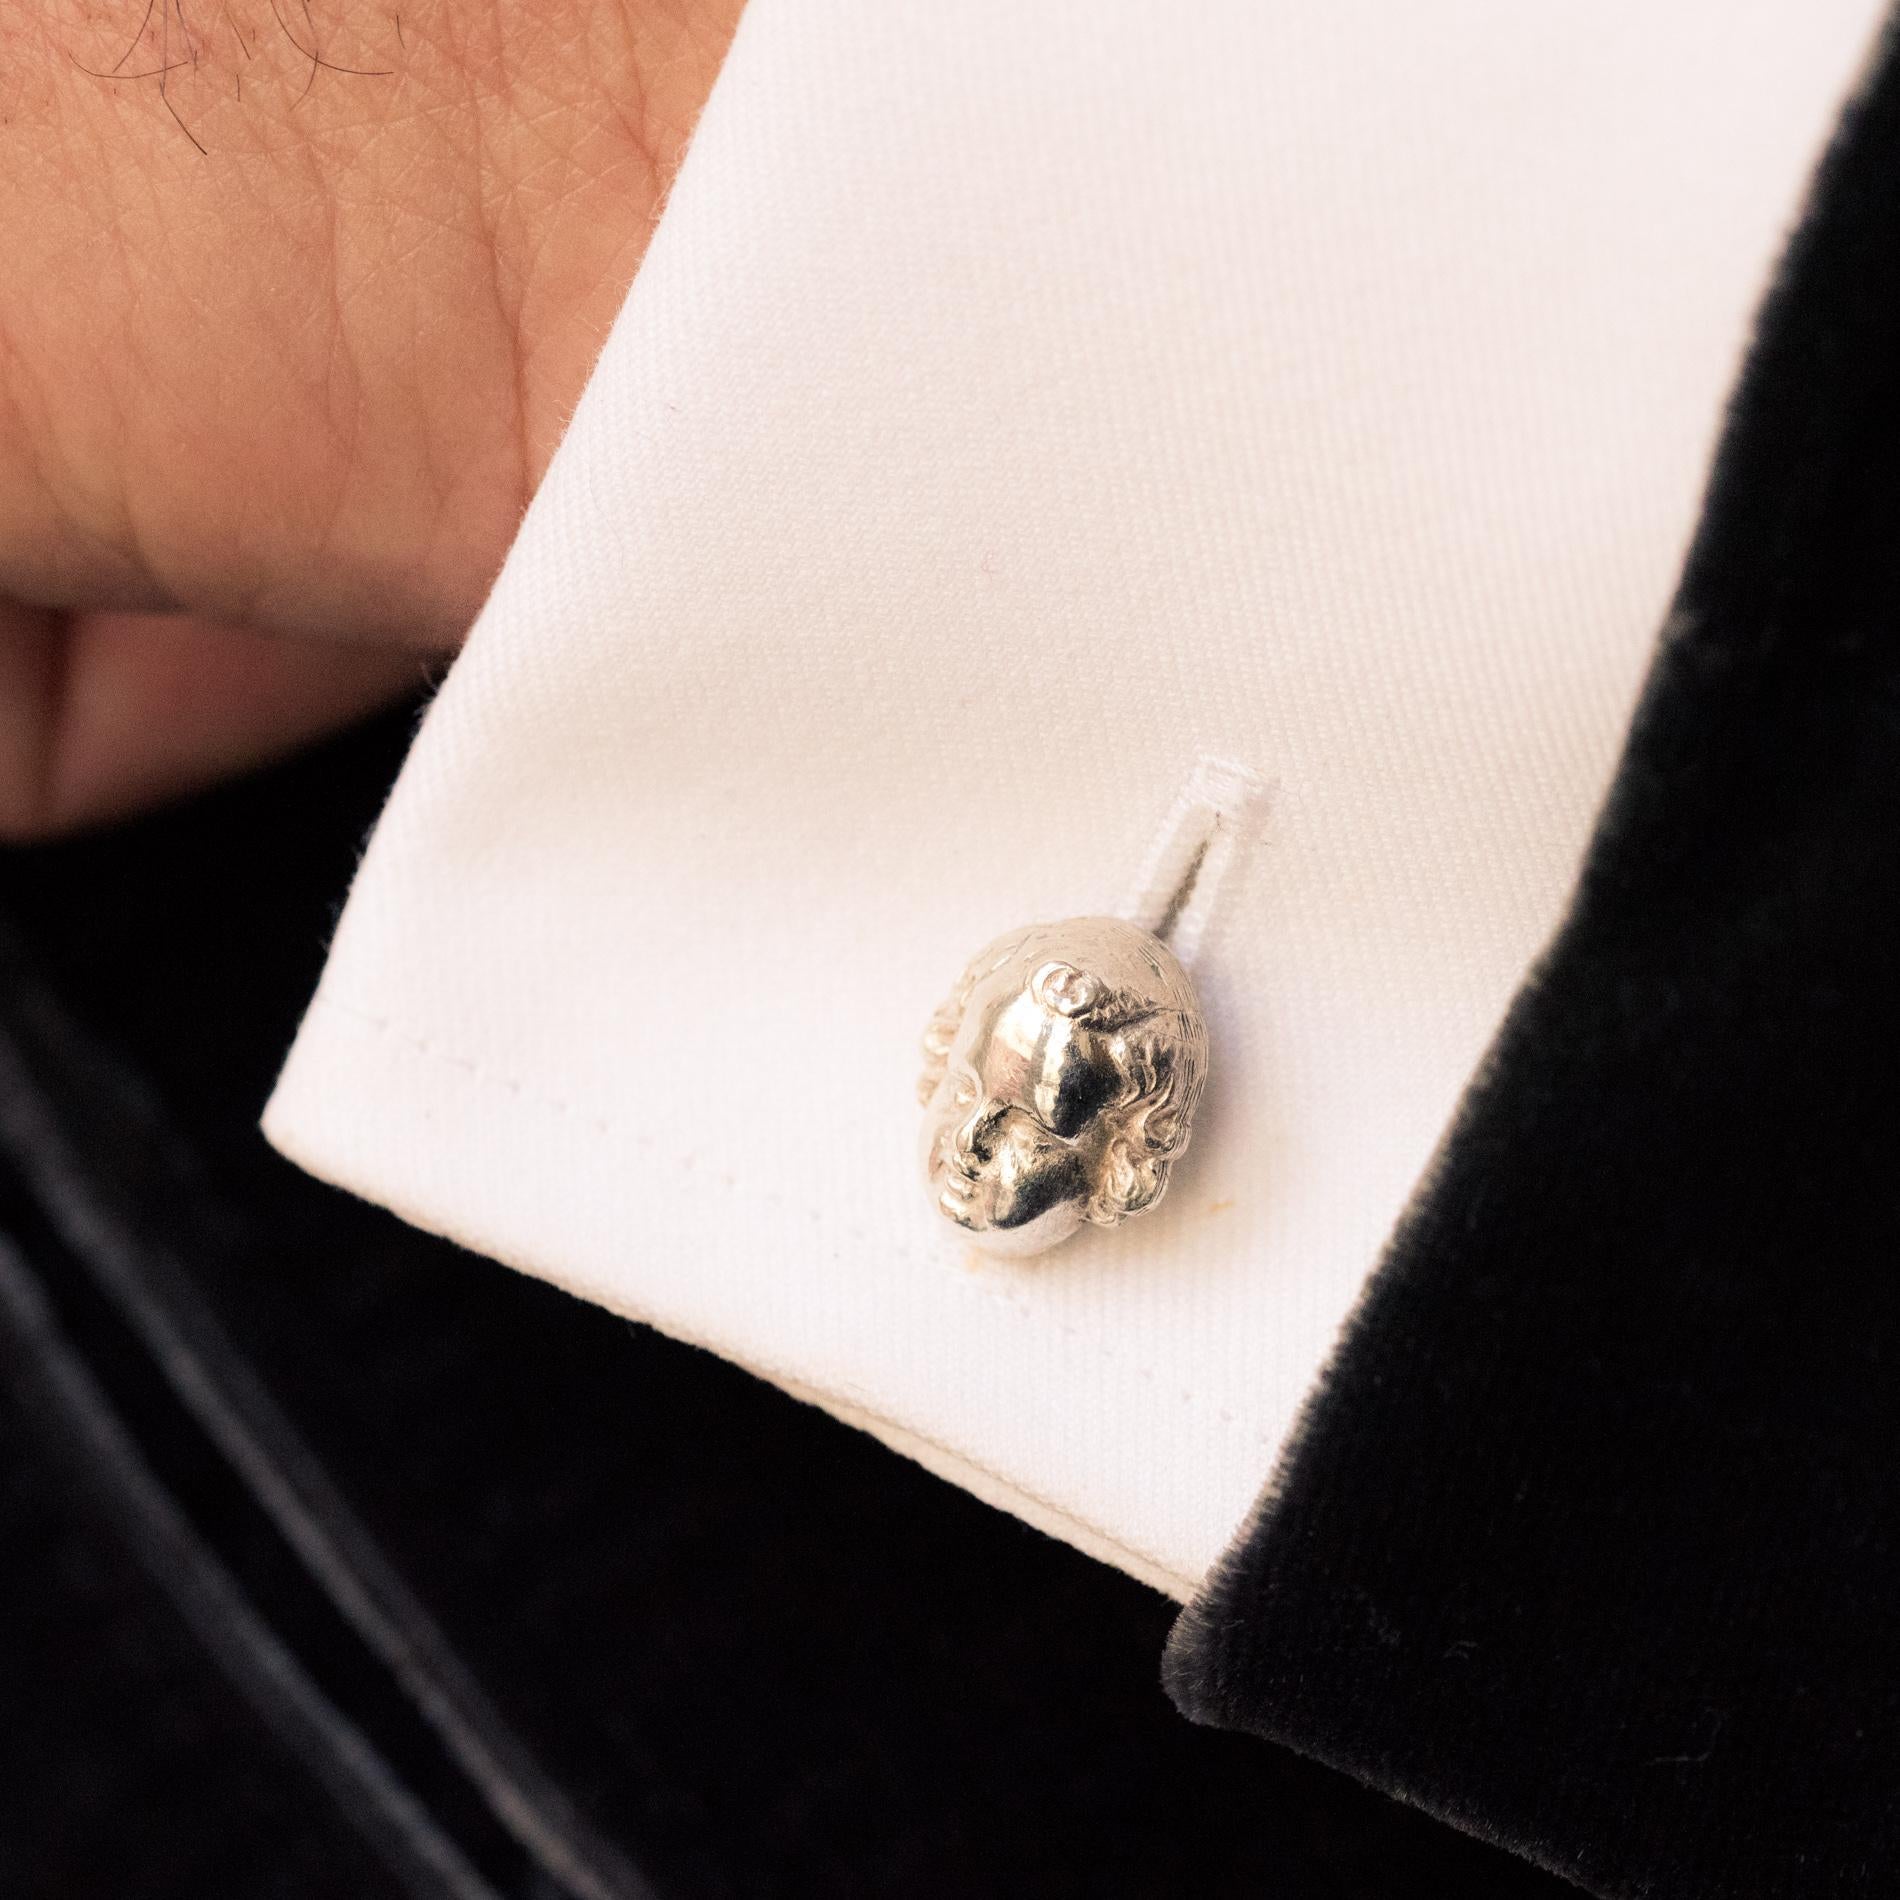 Pair of cufflinks in silver, wild boar's head hallmark.
Each antique cufflink represents two heads of children. The back of the heads are chiseled. They are held together by three oval links.
Height: 13.5 mm, width: approximately 11.4 mm, thickness: